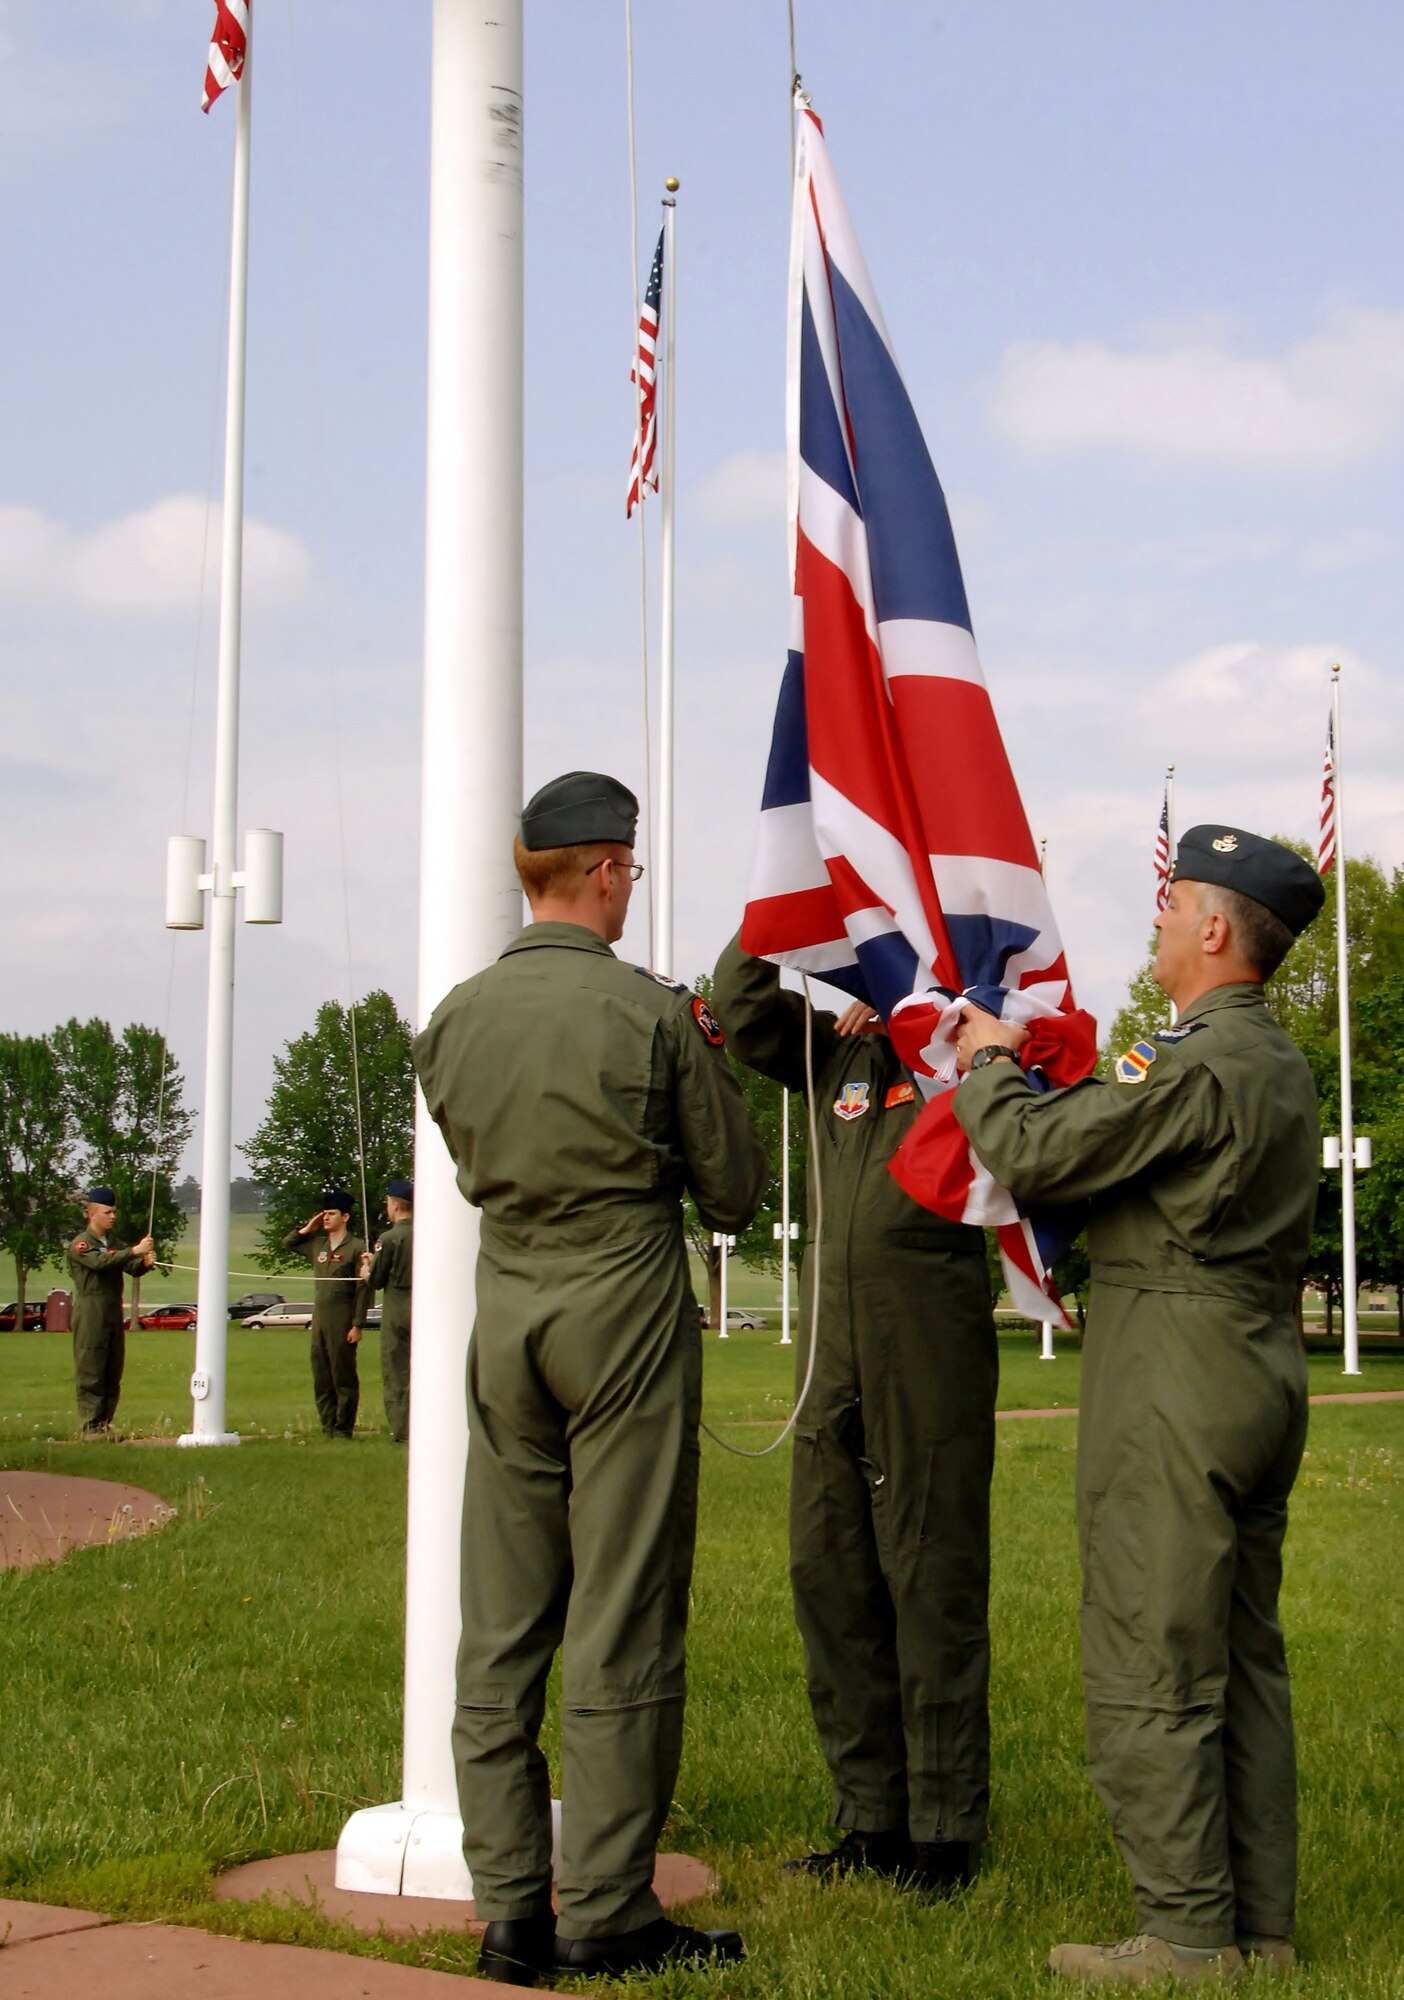 OFFUTT AIR FORCE BASE, Neb. -- The flag of the United Kingdom is lowered by Royal Air Force members Master Aircrew Kevin Ross, Master Aircrew Glyn Vigurs and Master Aircrew Stephen Jones during a special retreat ceremony here May 18. The RAF members are attending RC-135V/W initial qualification training here and joined with other members of the 338th Combat Training Squadron in the special ceremony at the parade grounds. (Air Force photo by Dana Heard)